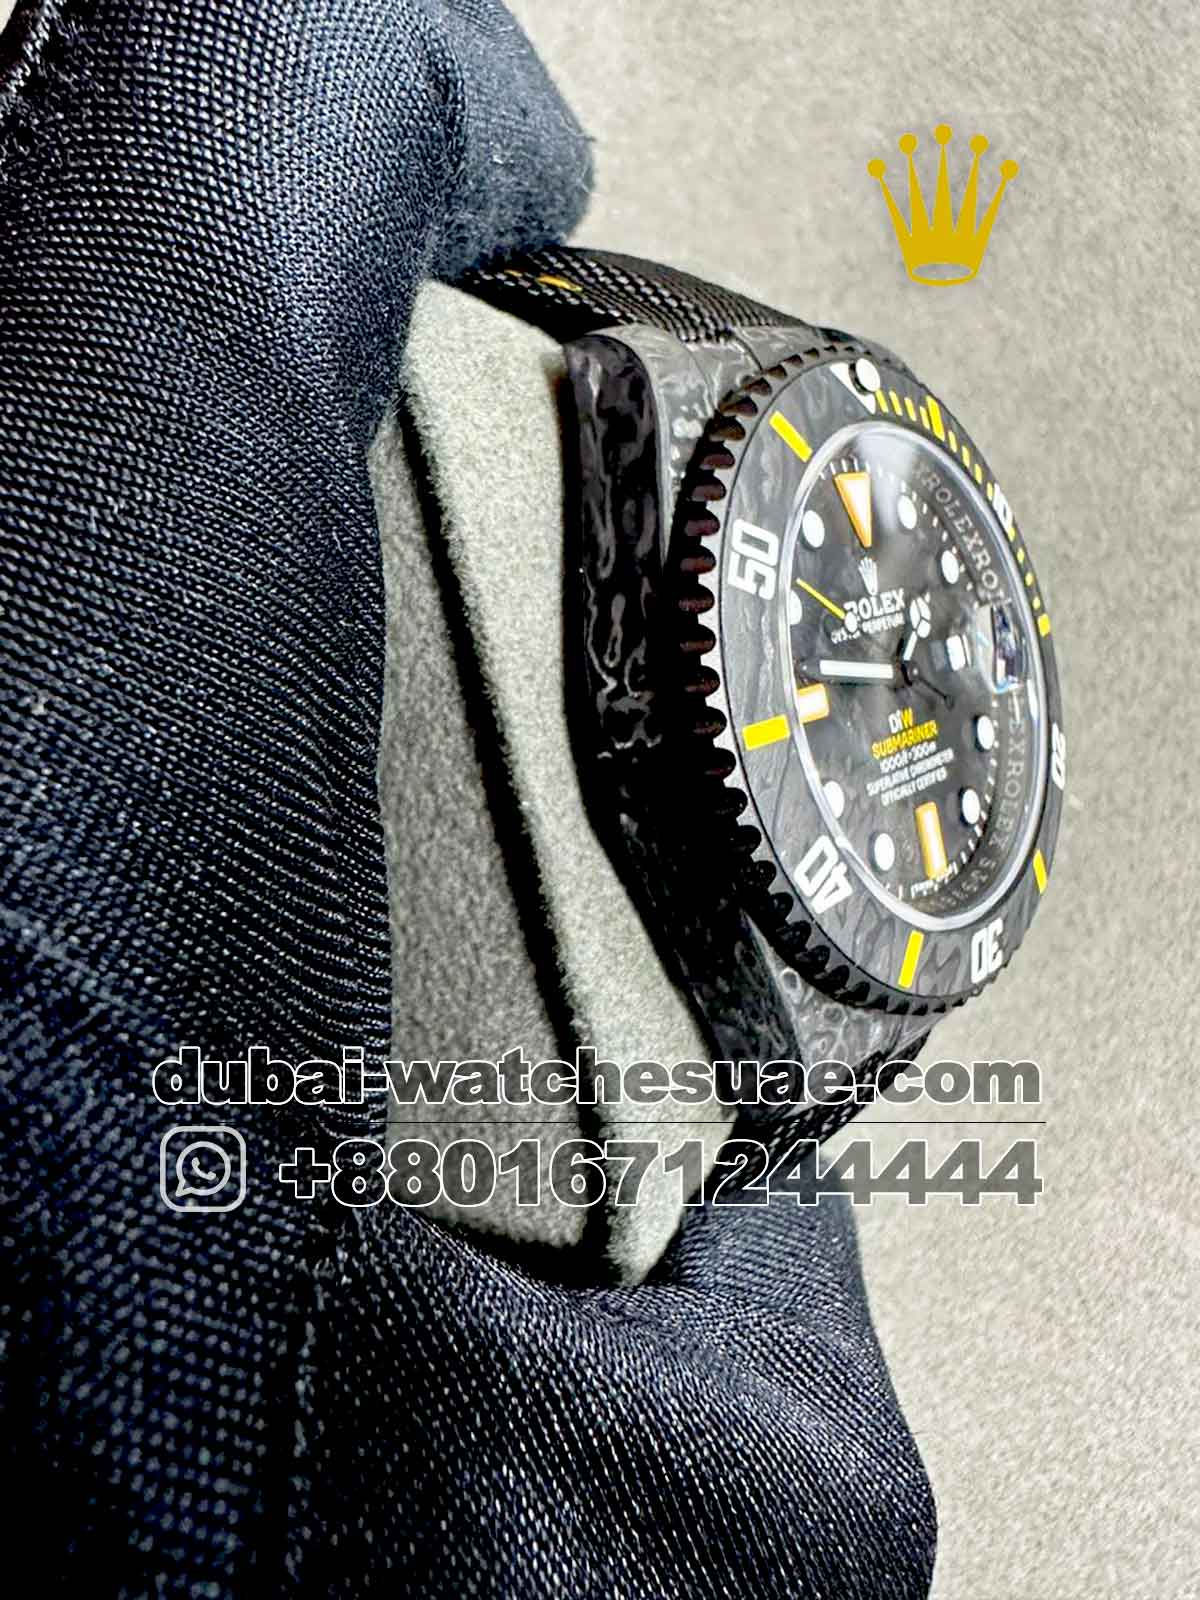 Replica Rolex Submariner DiW Carbon 40 mm Black and Yellow